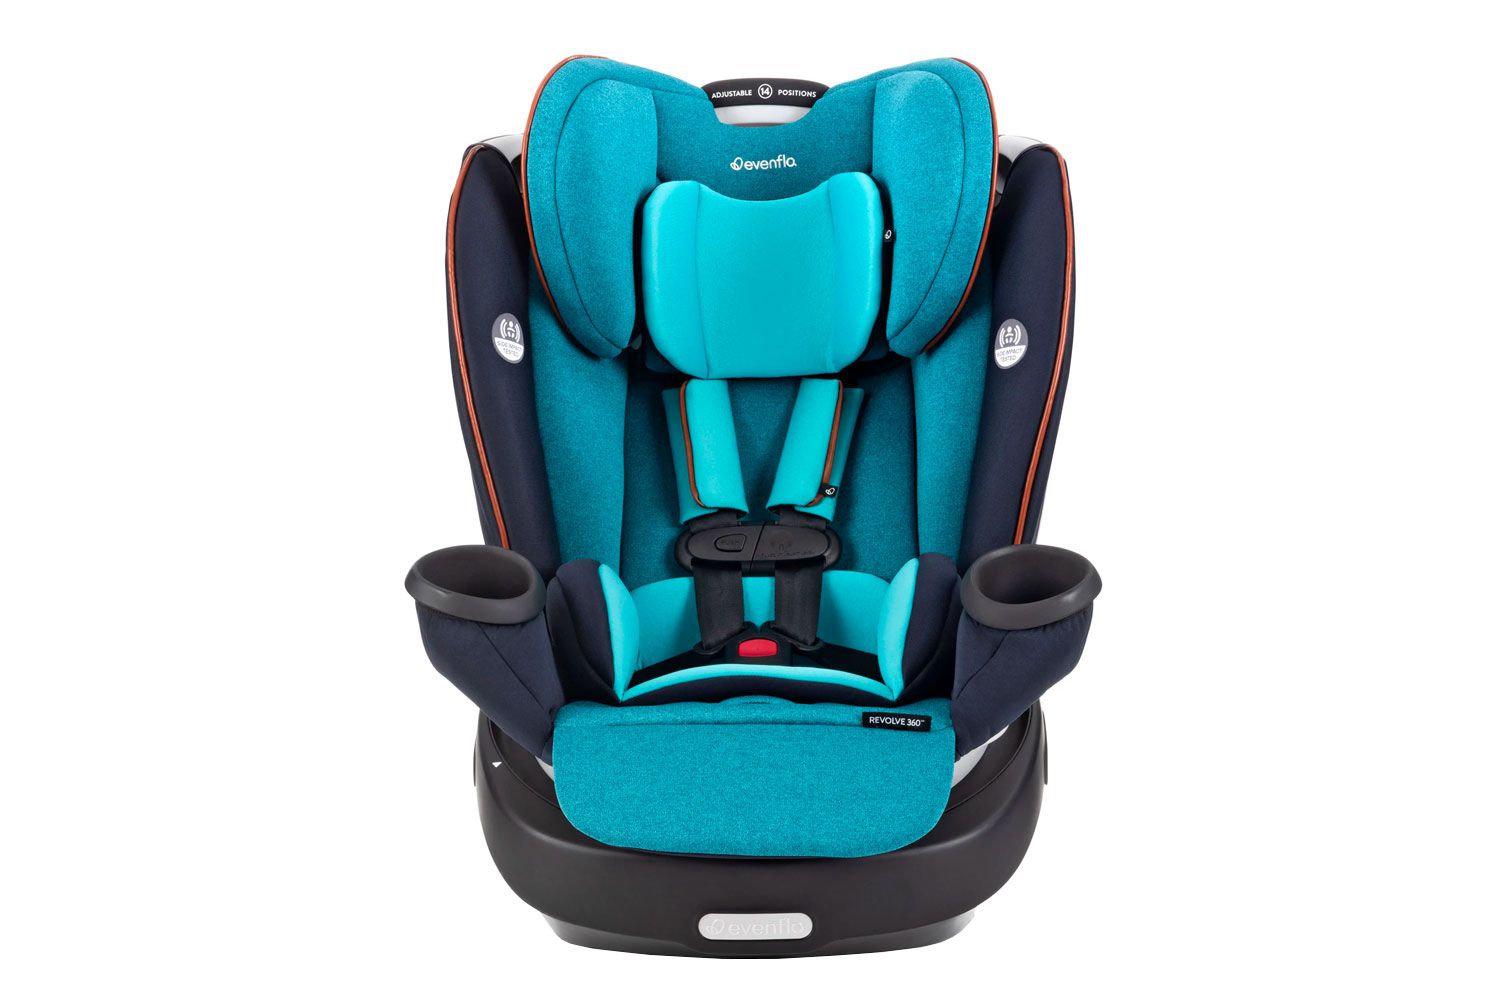 Evenflo Gold Revolve360 Rotational All-In-One Convertible Car Seat